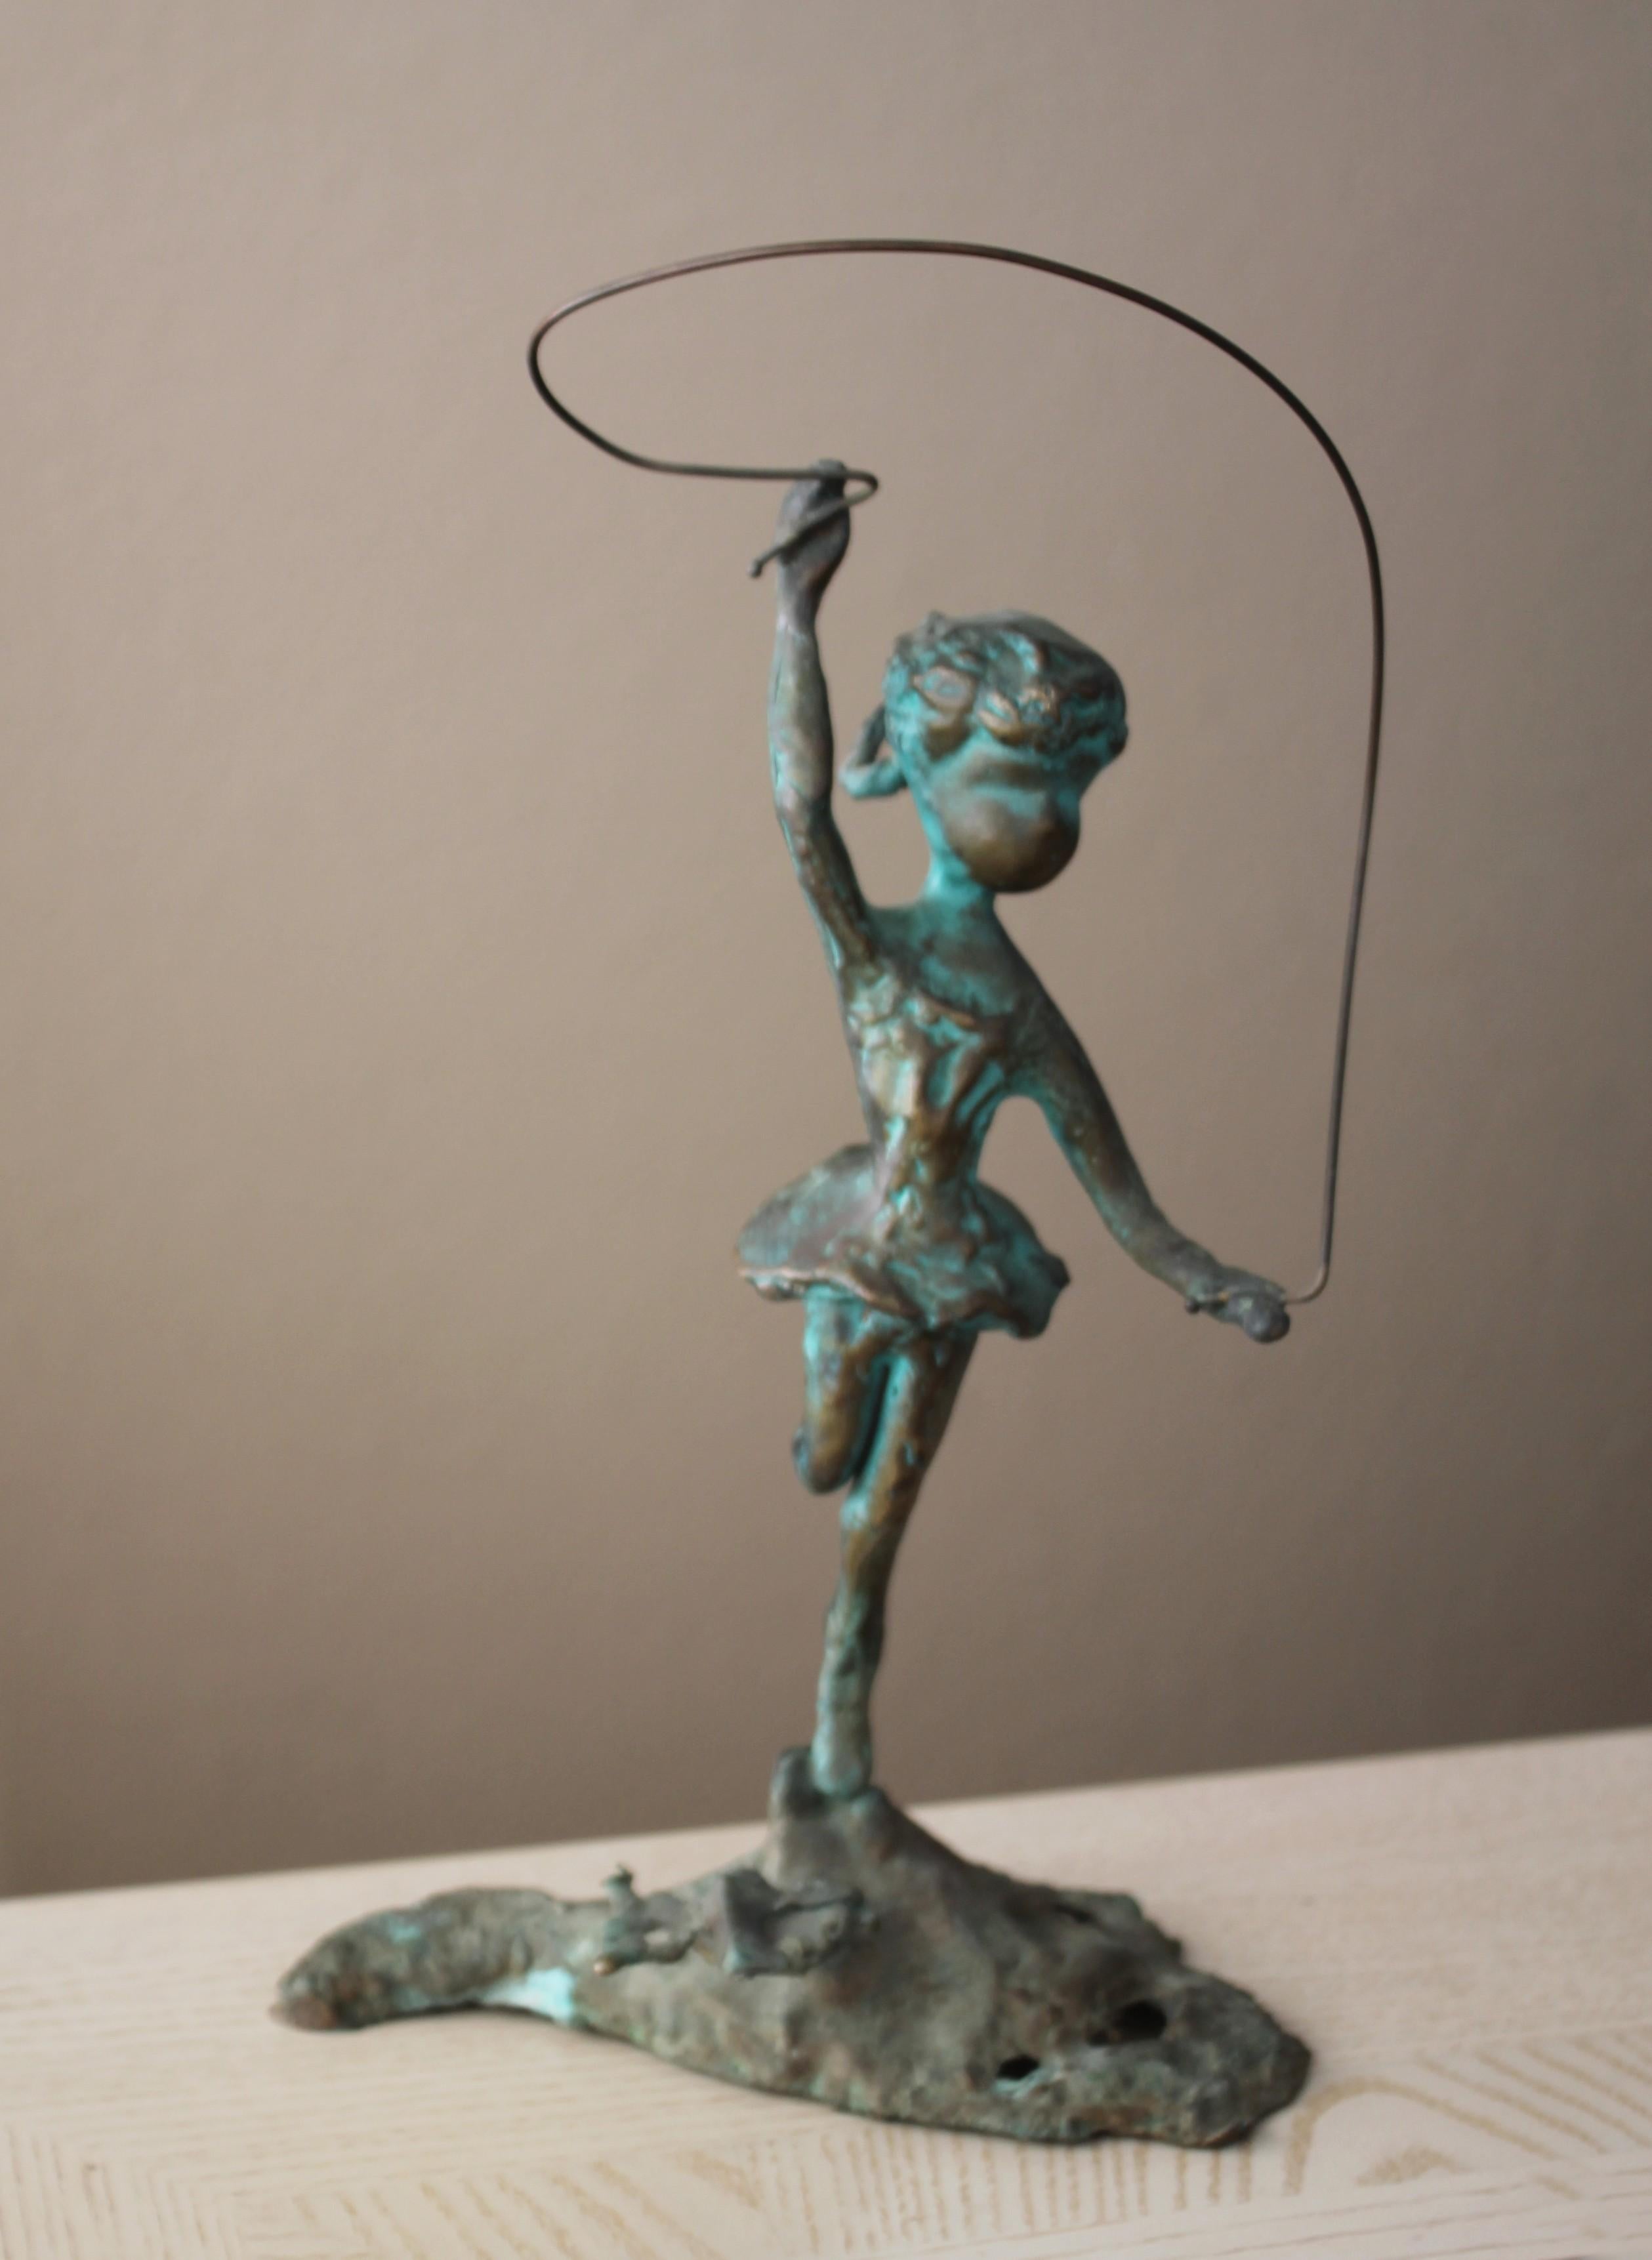 Wow!

Rare Early Malcolm Moran
Cranbrook Industries
Richards Morgenthou (Raymor)


Here is a super rare 1950s work by, then starting out, sculptor Malcolm Moran for Cranbrook Industries! These Cranbrook sculptures were distributed only though Raymor